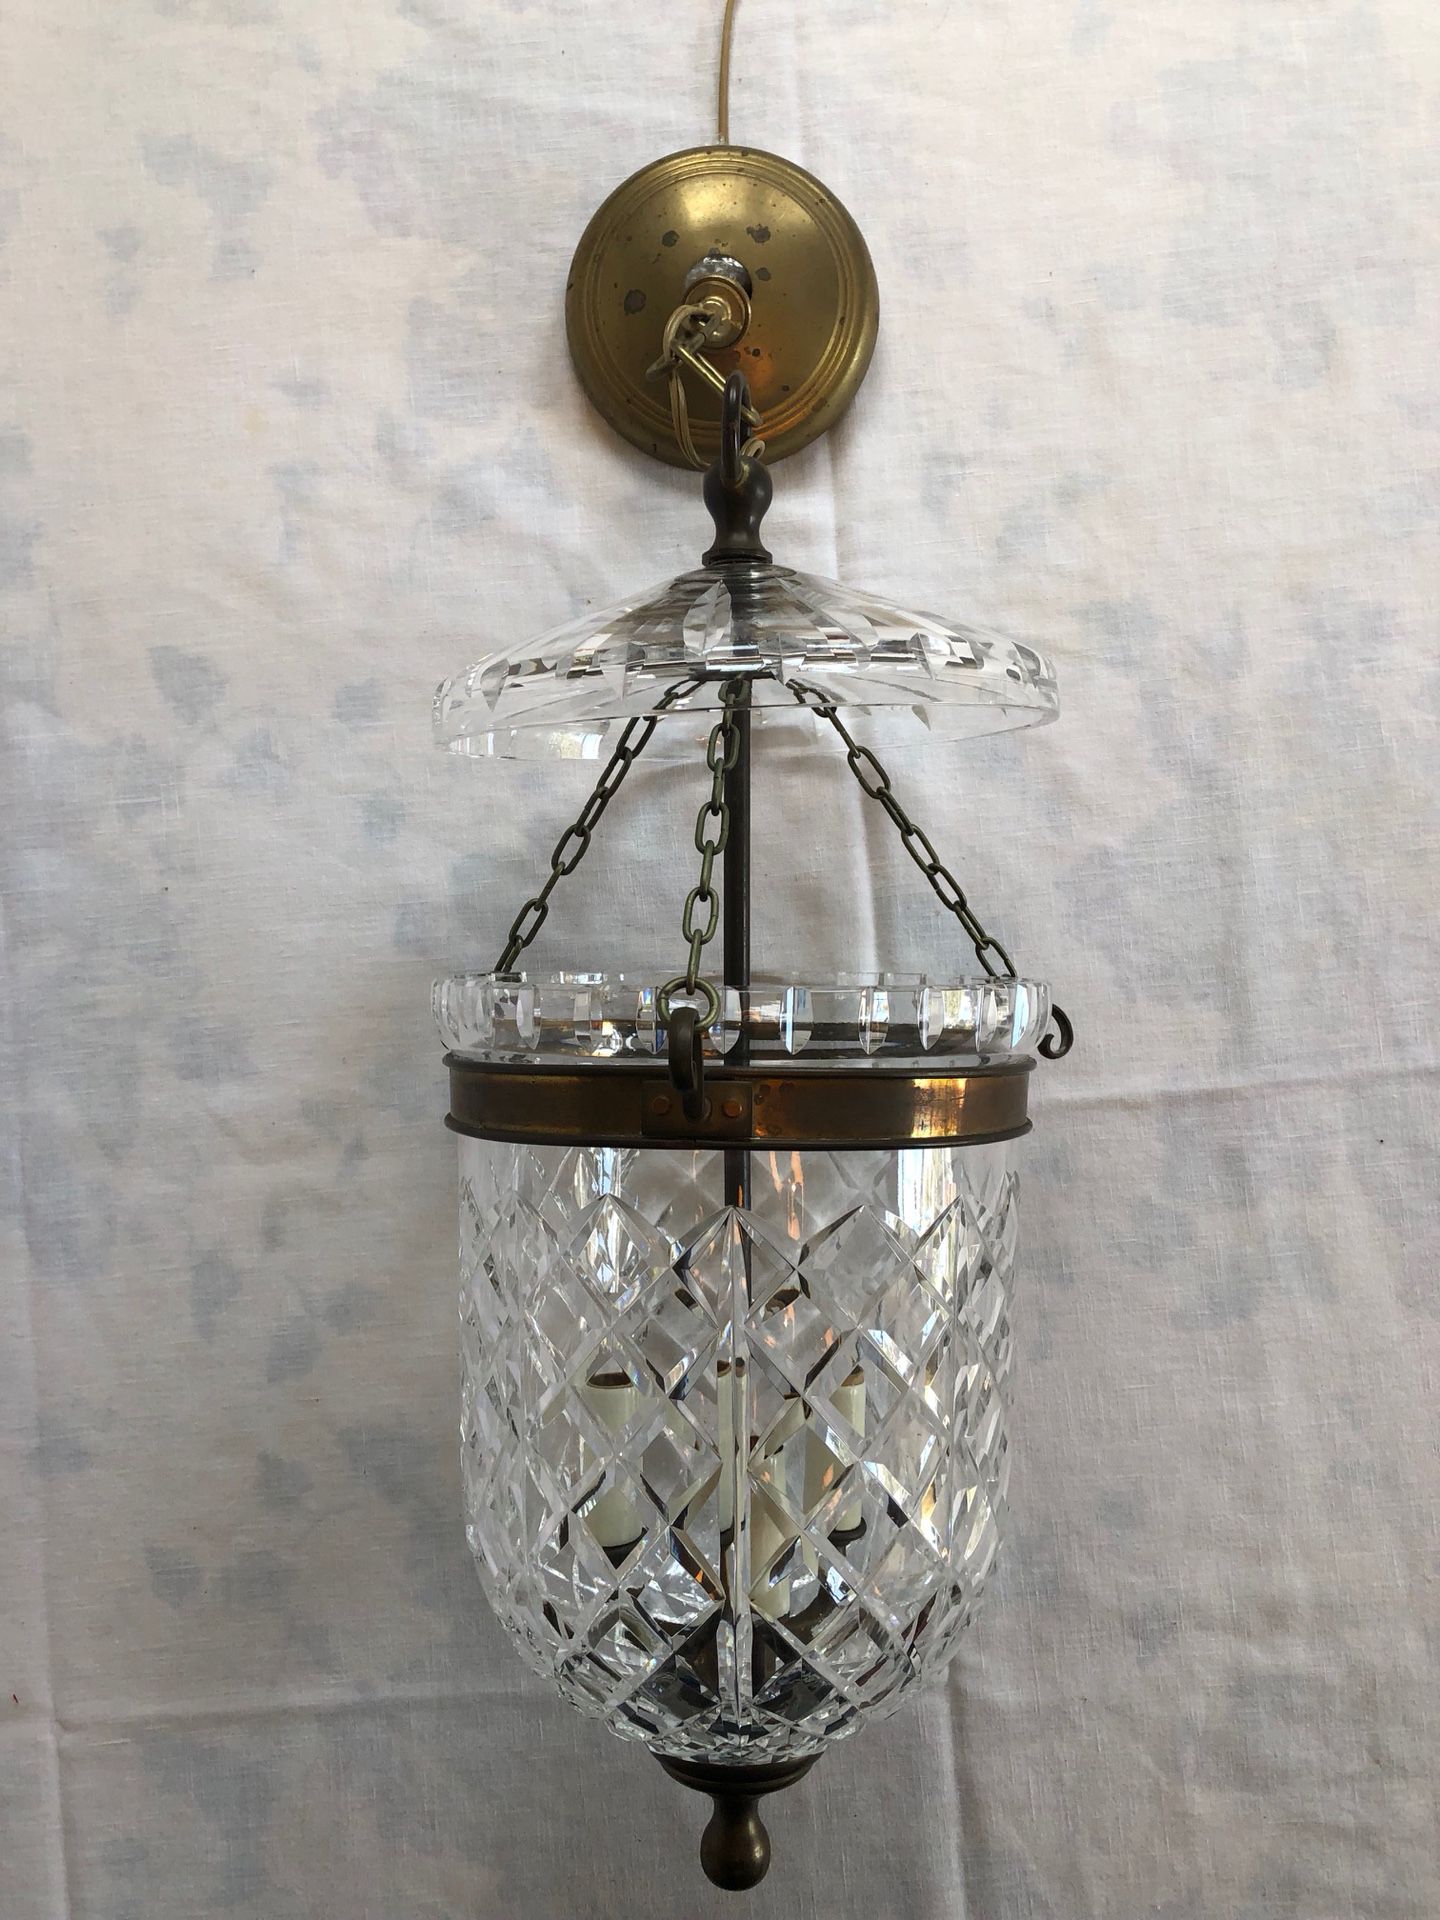 Vintage Waterford crystal Bell Jar chandelier with brass accents